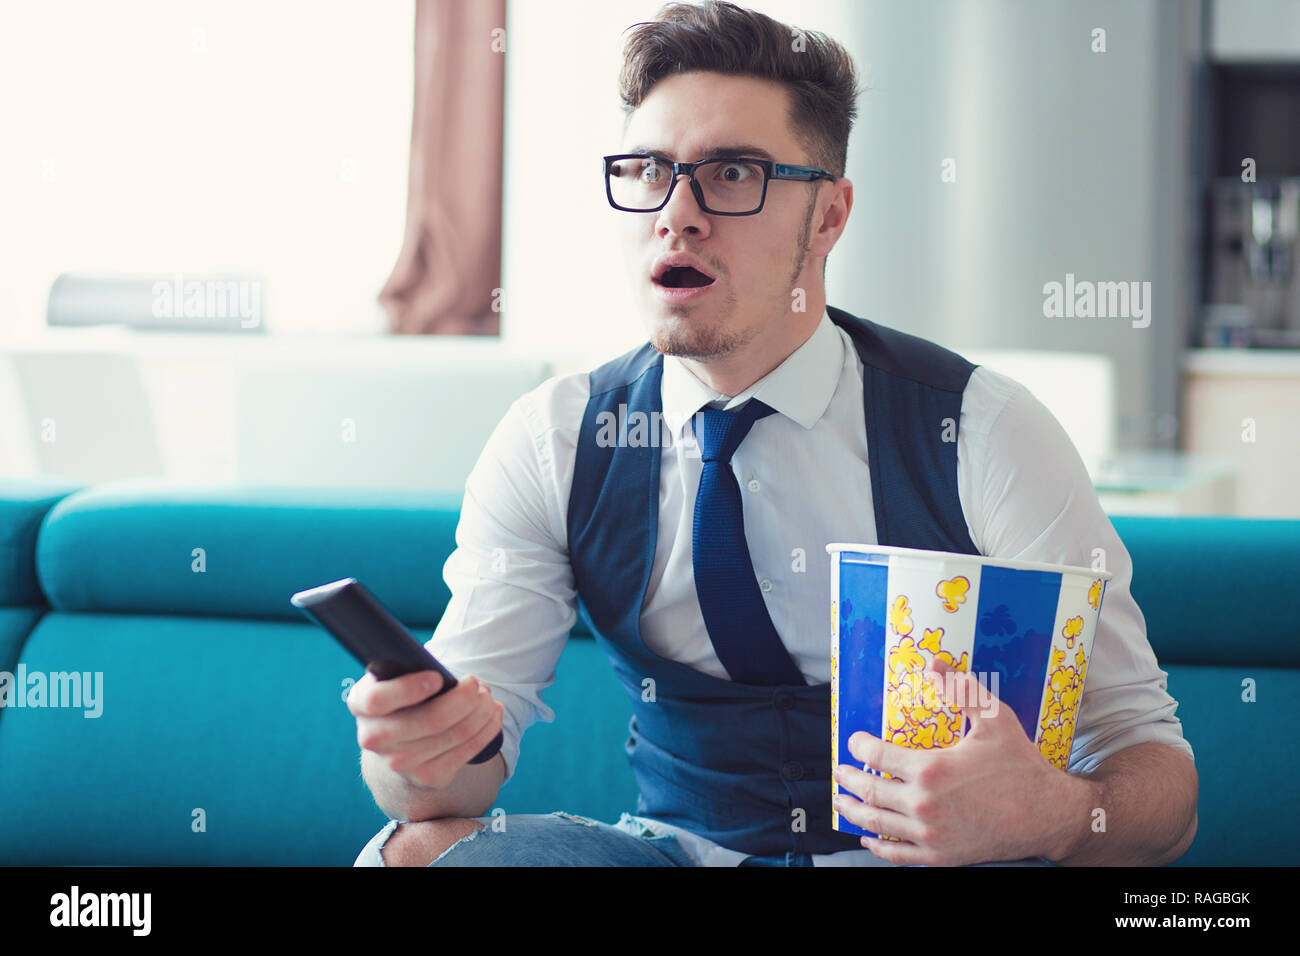 Portrait of an elegant man sitting on a couch, watching TV, holding remote and popcorn box, surprised at what he sees, isolated indoors flat backgroun Stock Photo